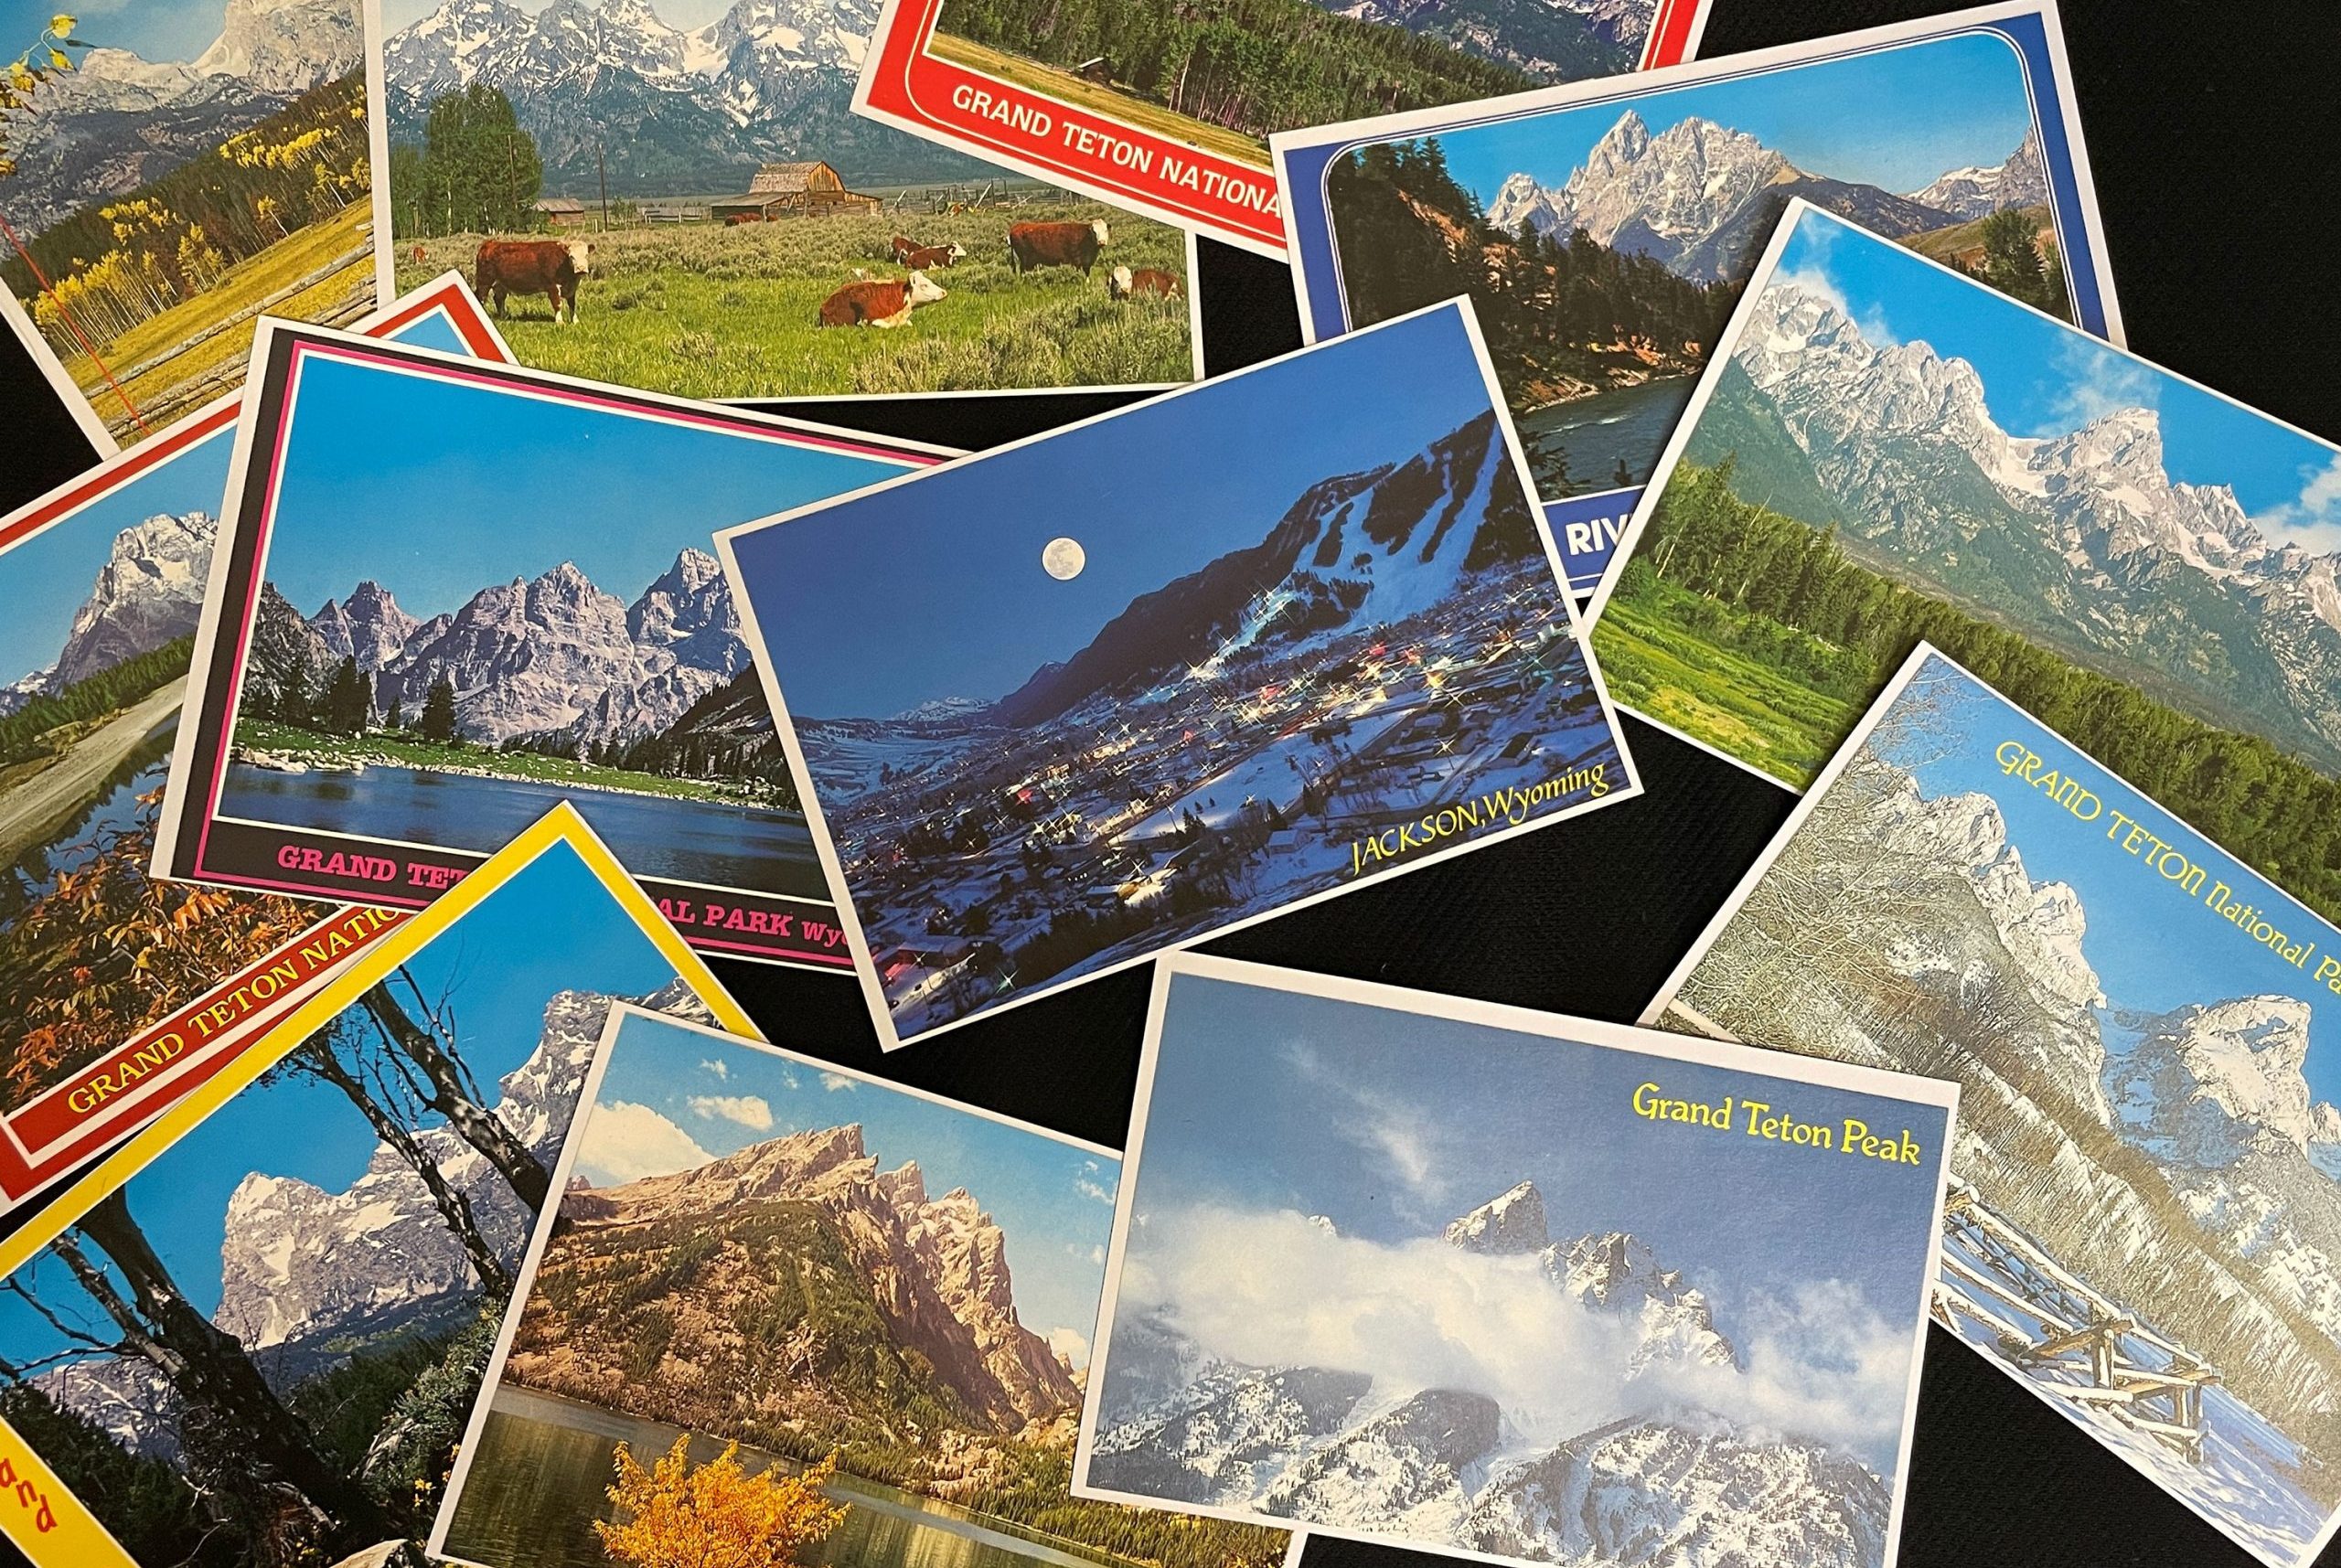 12 postcards show scenes from Grand Teton National Park in Wyoming, USA.